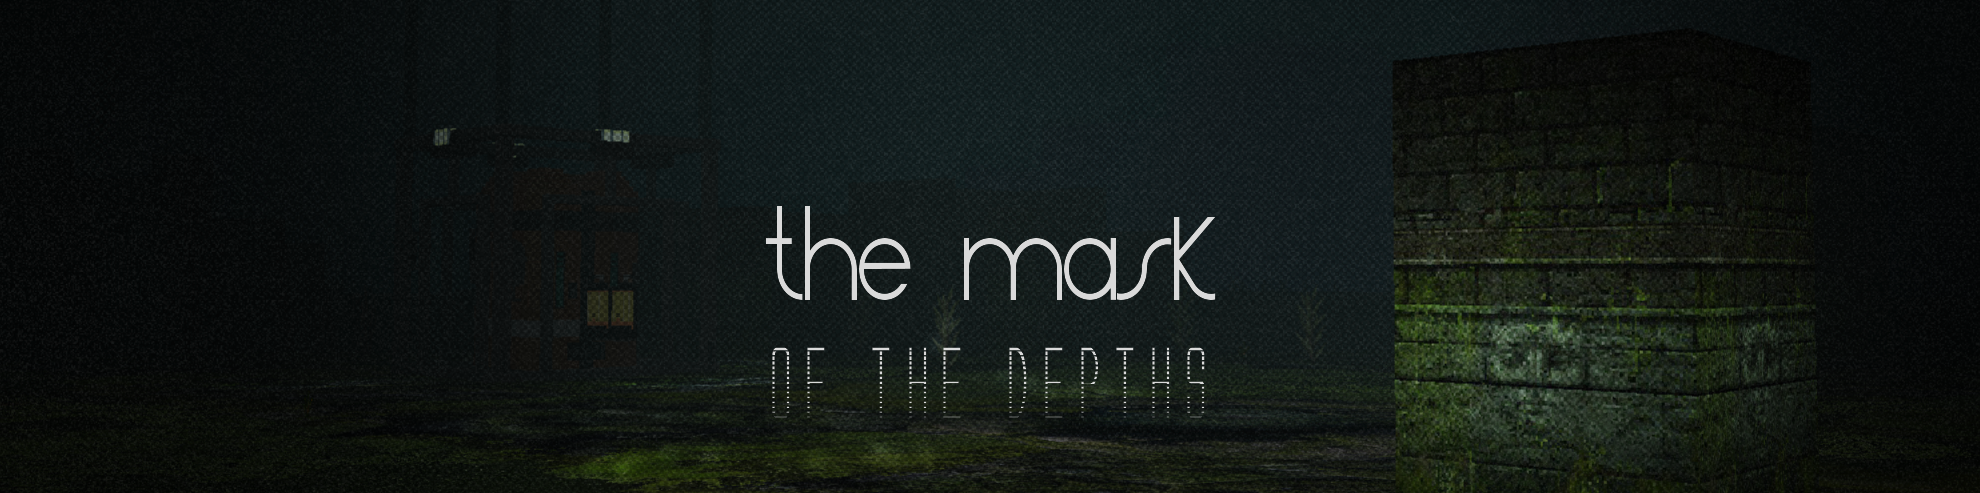 The Mask of the Depths